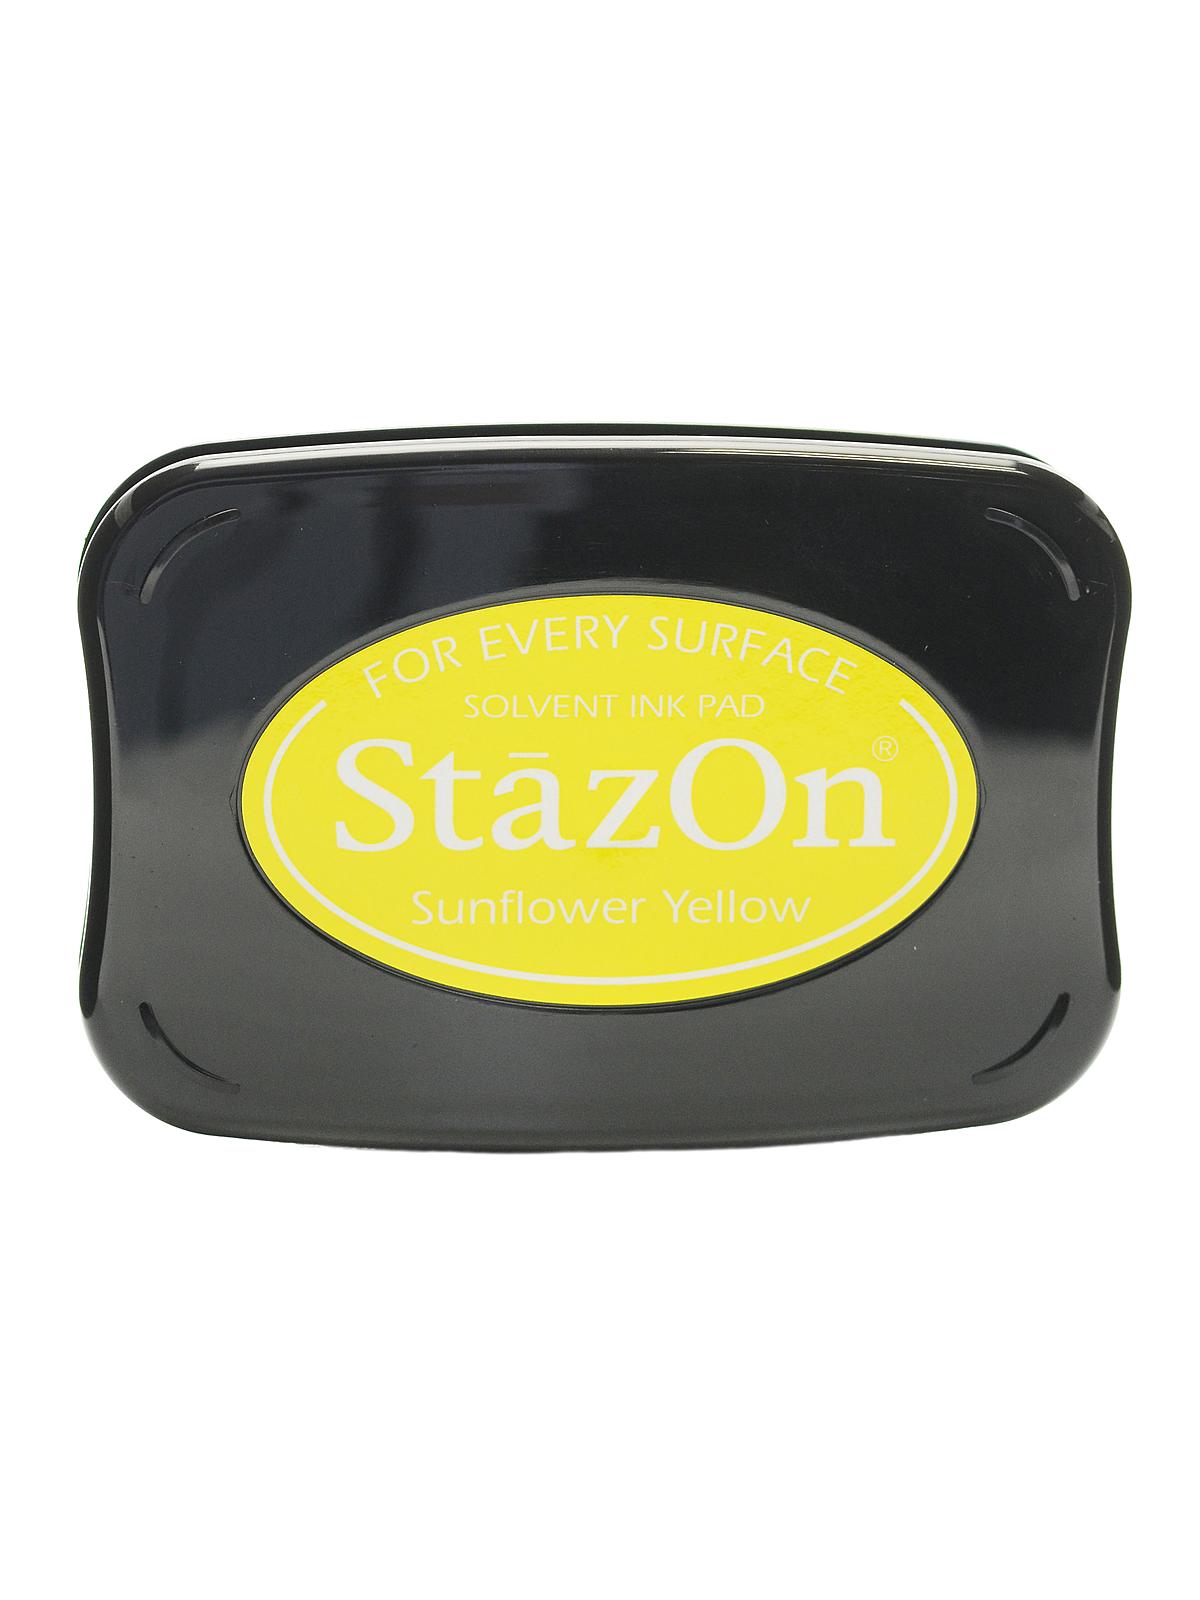 Stazon Solvent Ink Sunflower Yellow 3.75 In. X 2.625 In. Full-size Pad